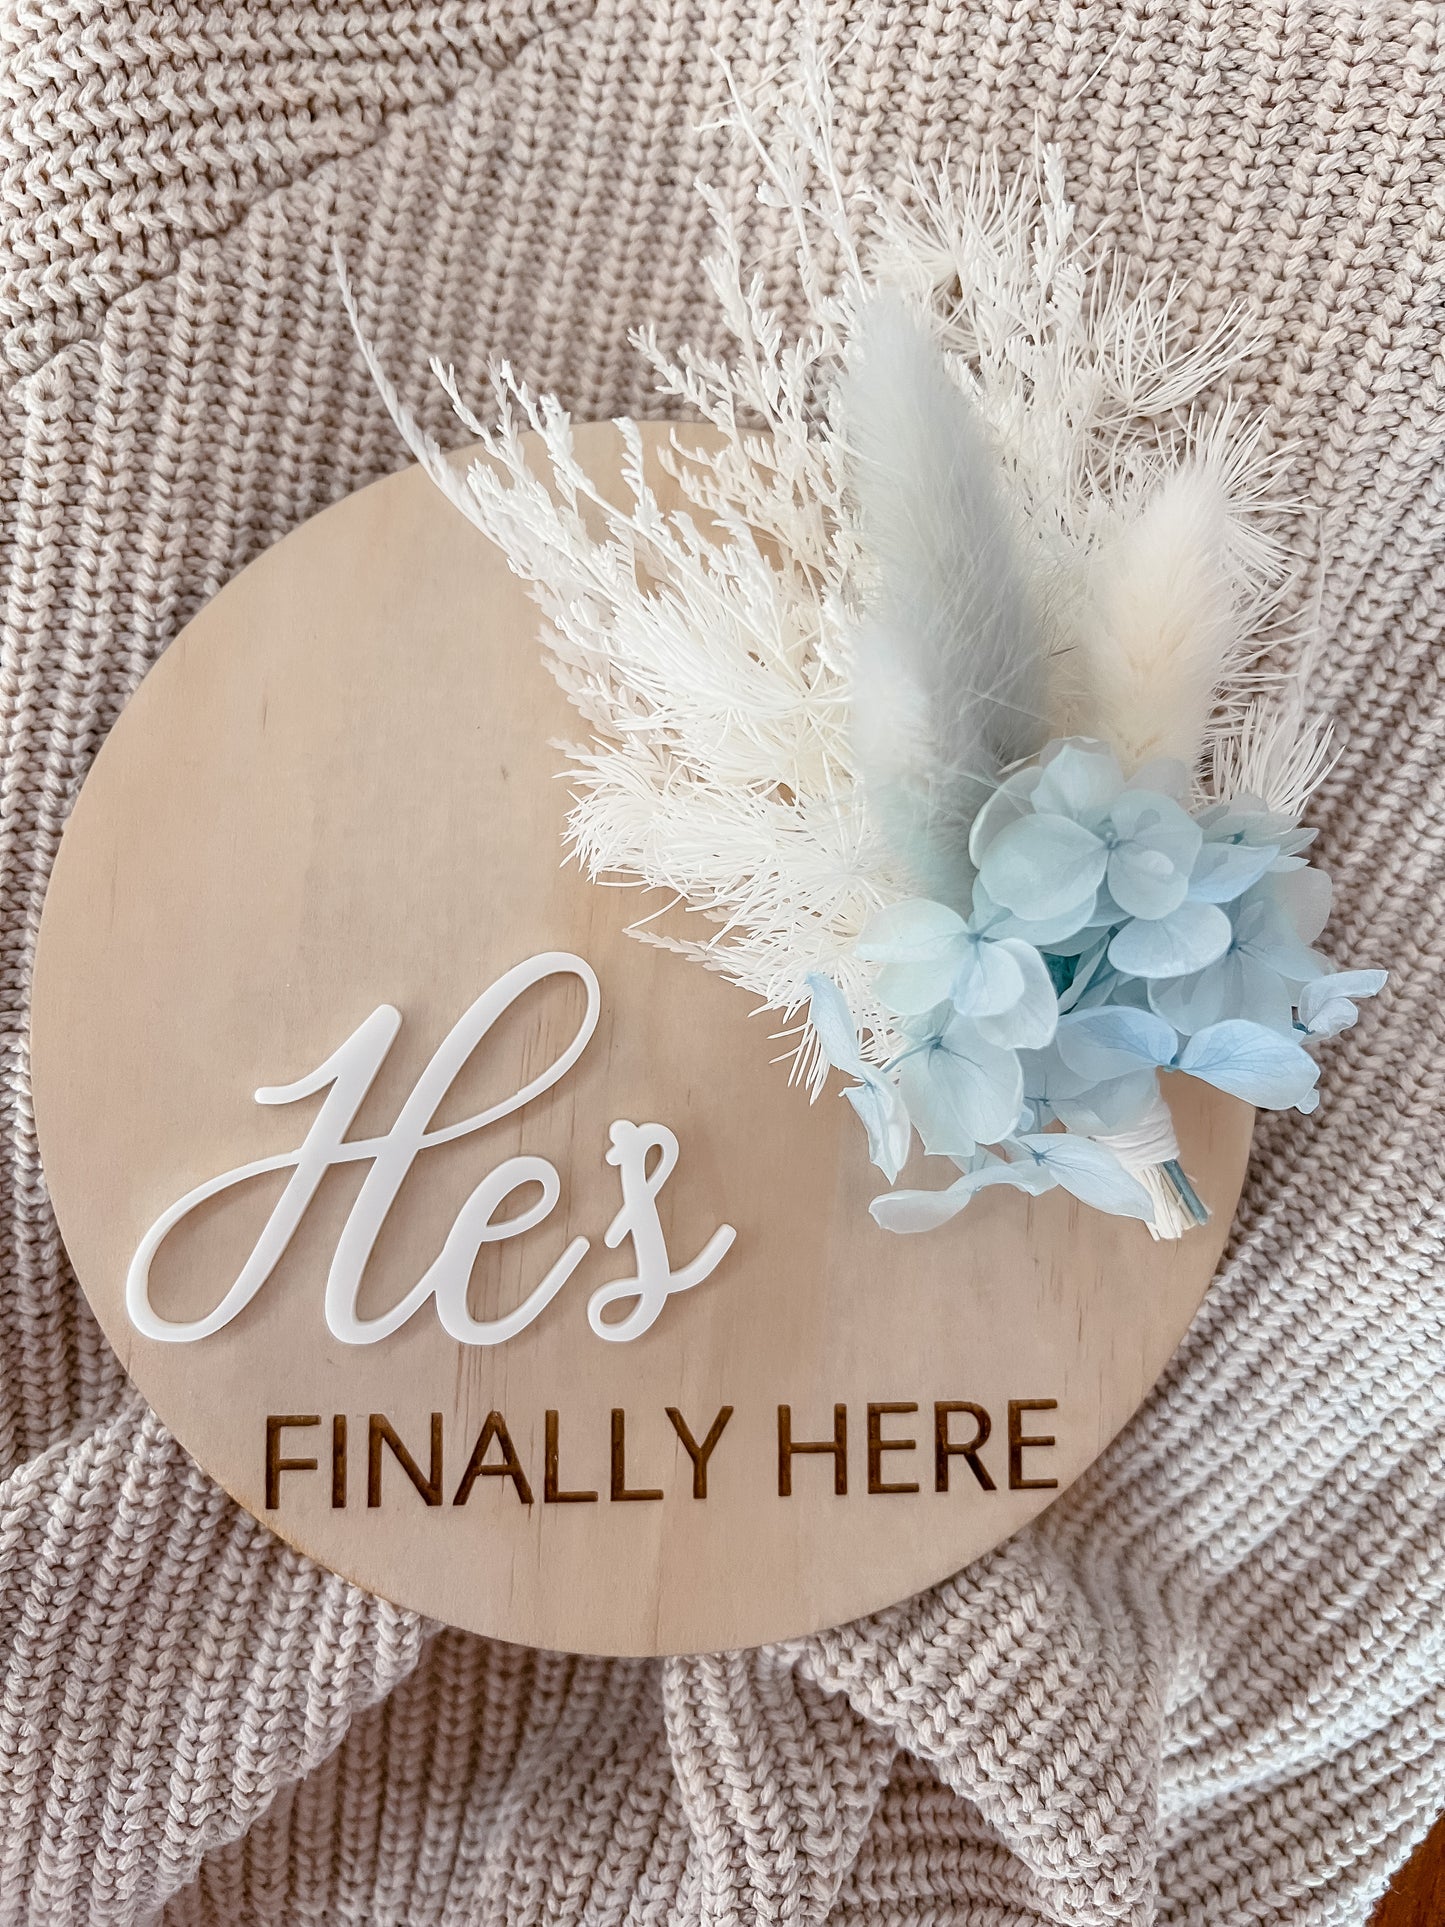 She/He/They're finally here - Birth Announcement Plaque w/ dried flowers